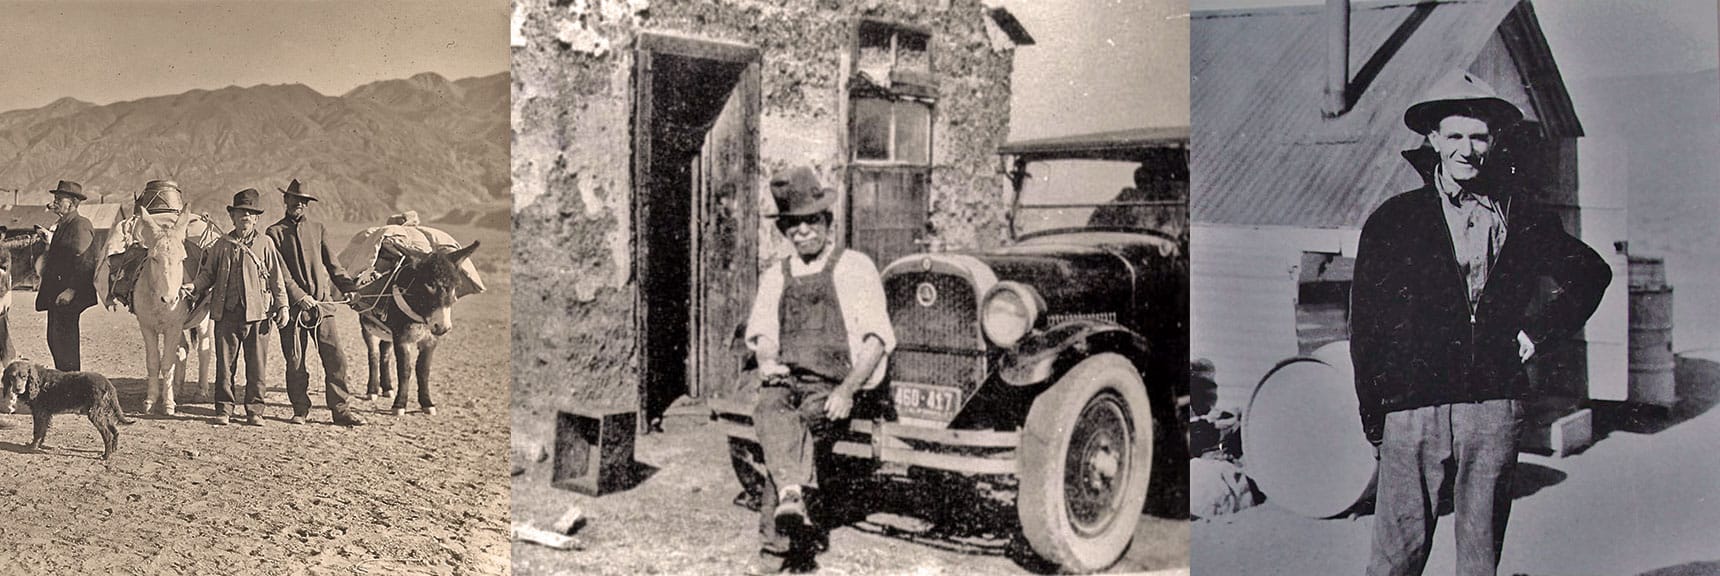 Pete Aguereberry and Shorty Harris Founded Mining Town of Harrisburg | Eureka Mine, Harrisburg, Cashier Mill, Death Valley, California